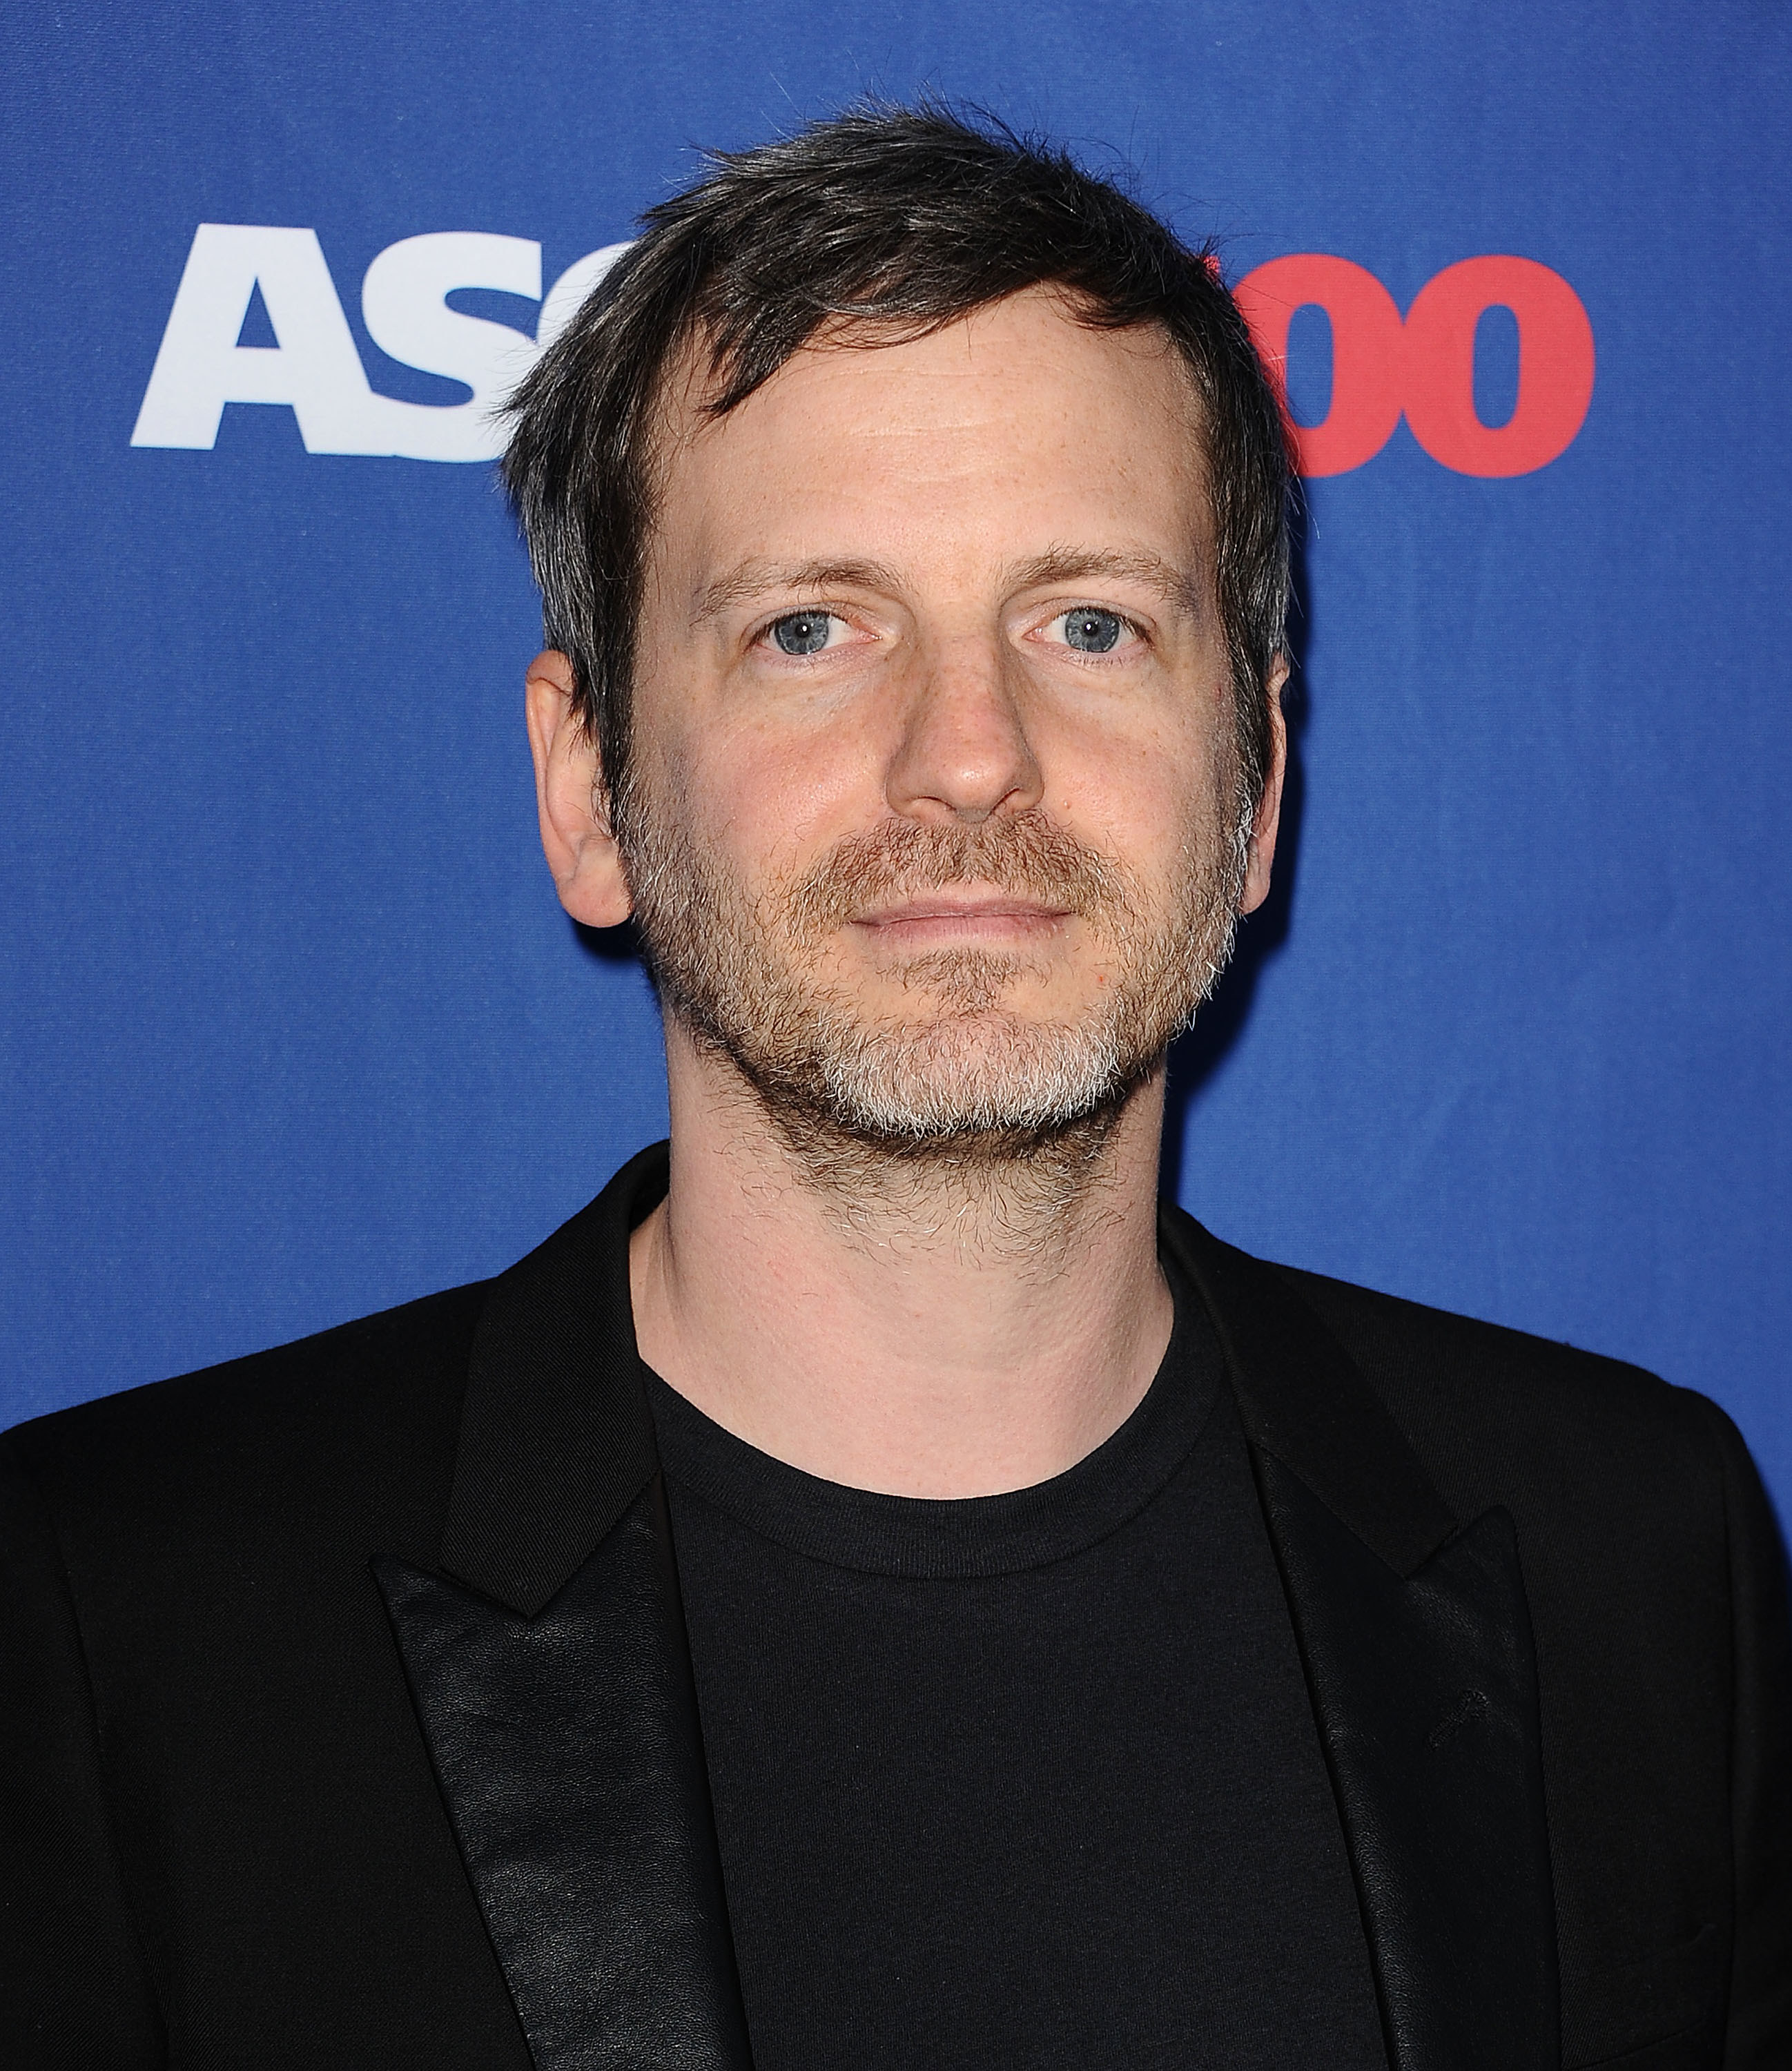 Dr. Luke looking at a camera at a red carpet event